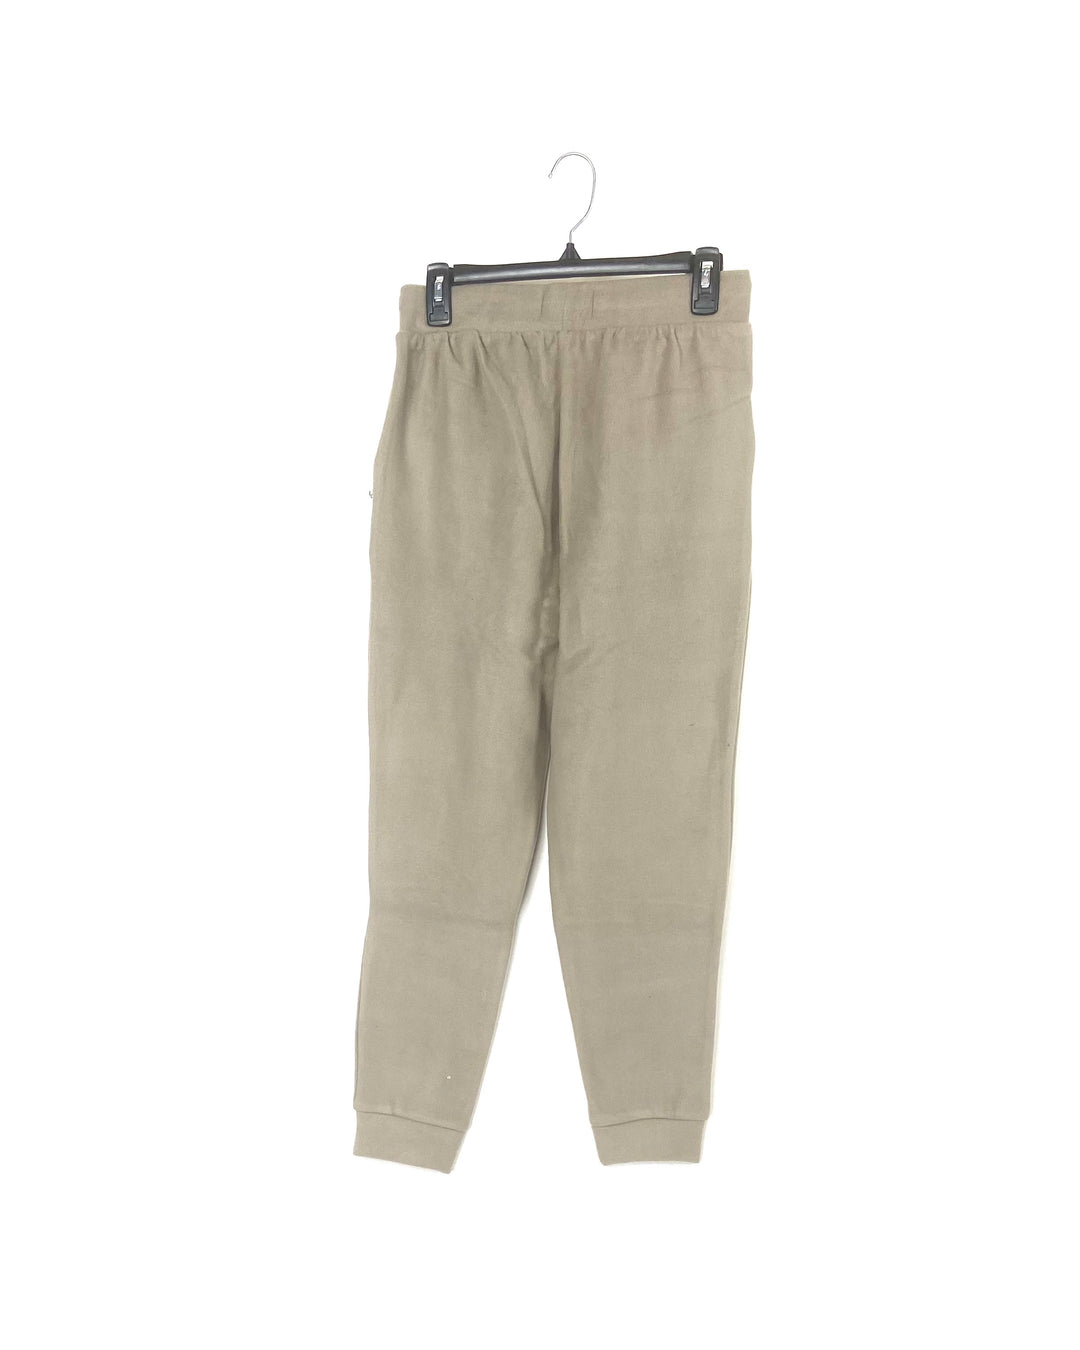 Taupe Soft Joggers - Extra Small and Small